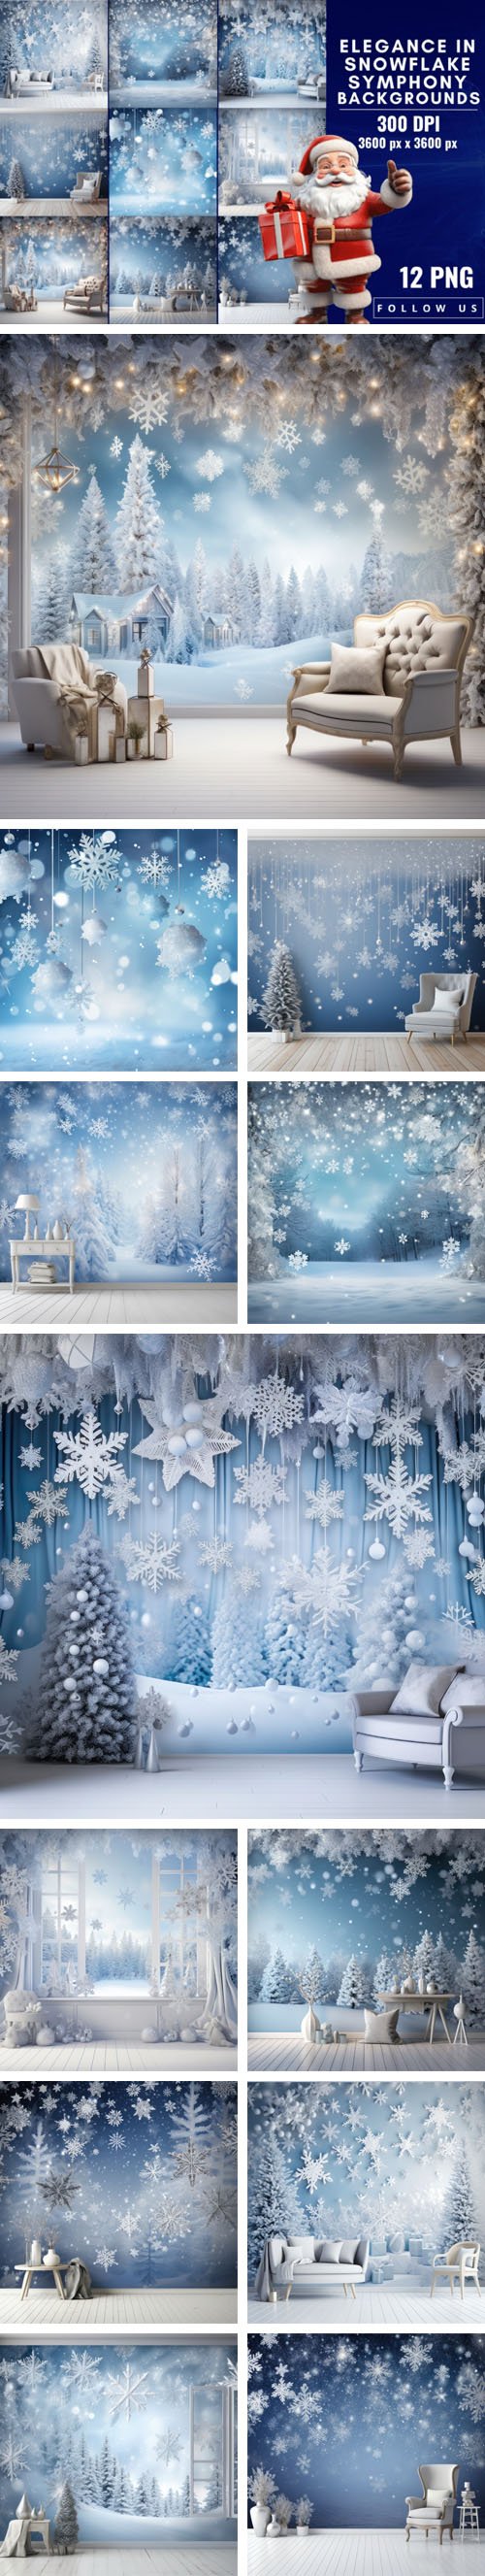 Elegance in Snowflake Symphony Backgrounds